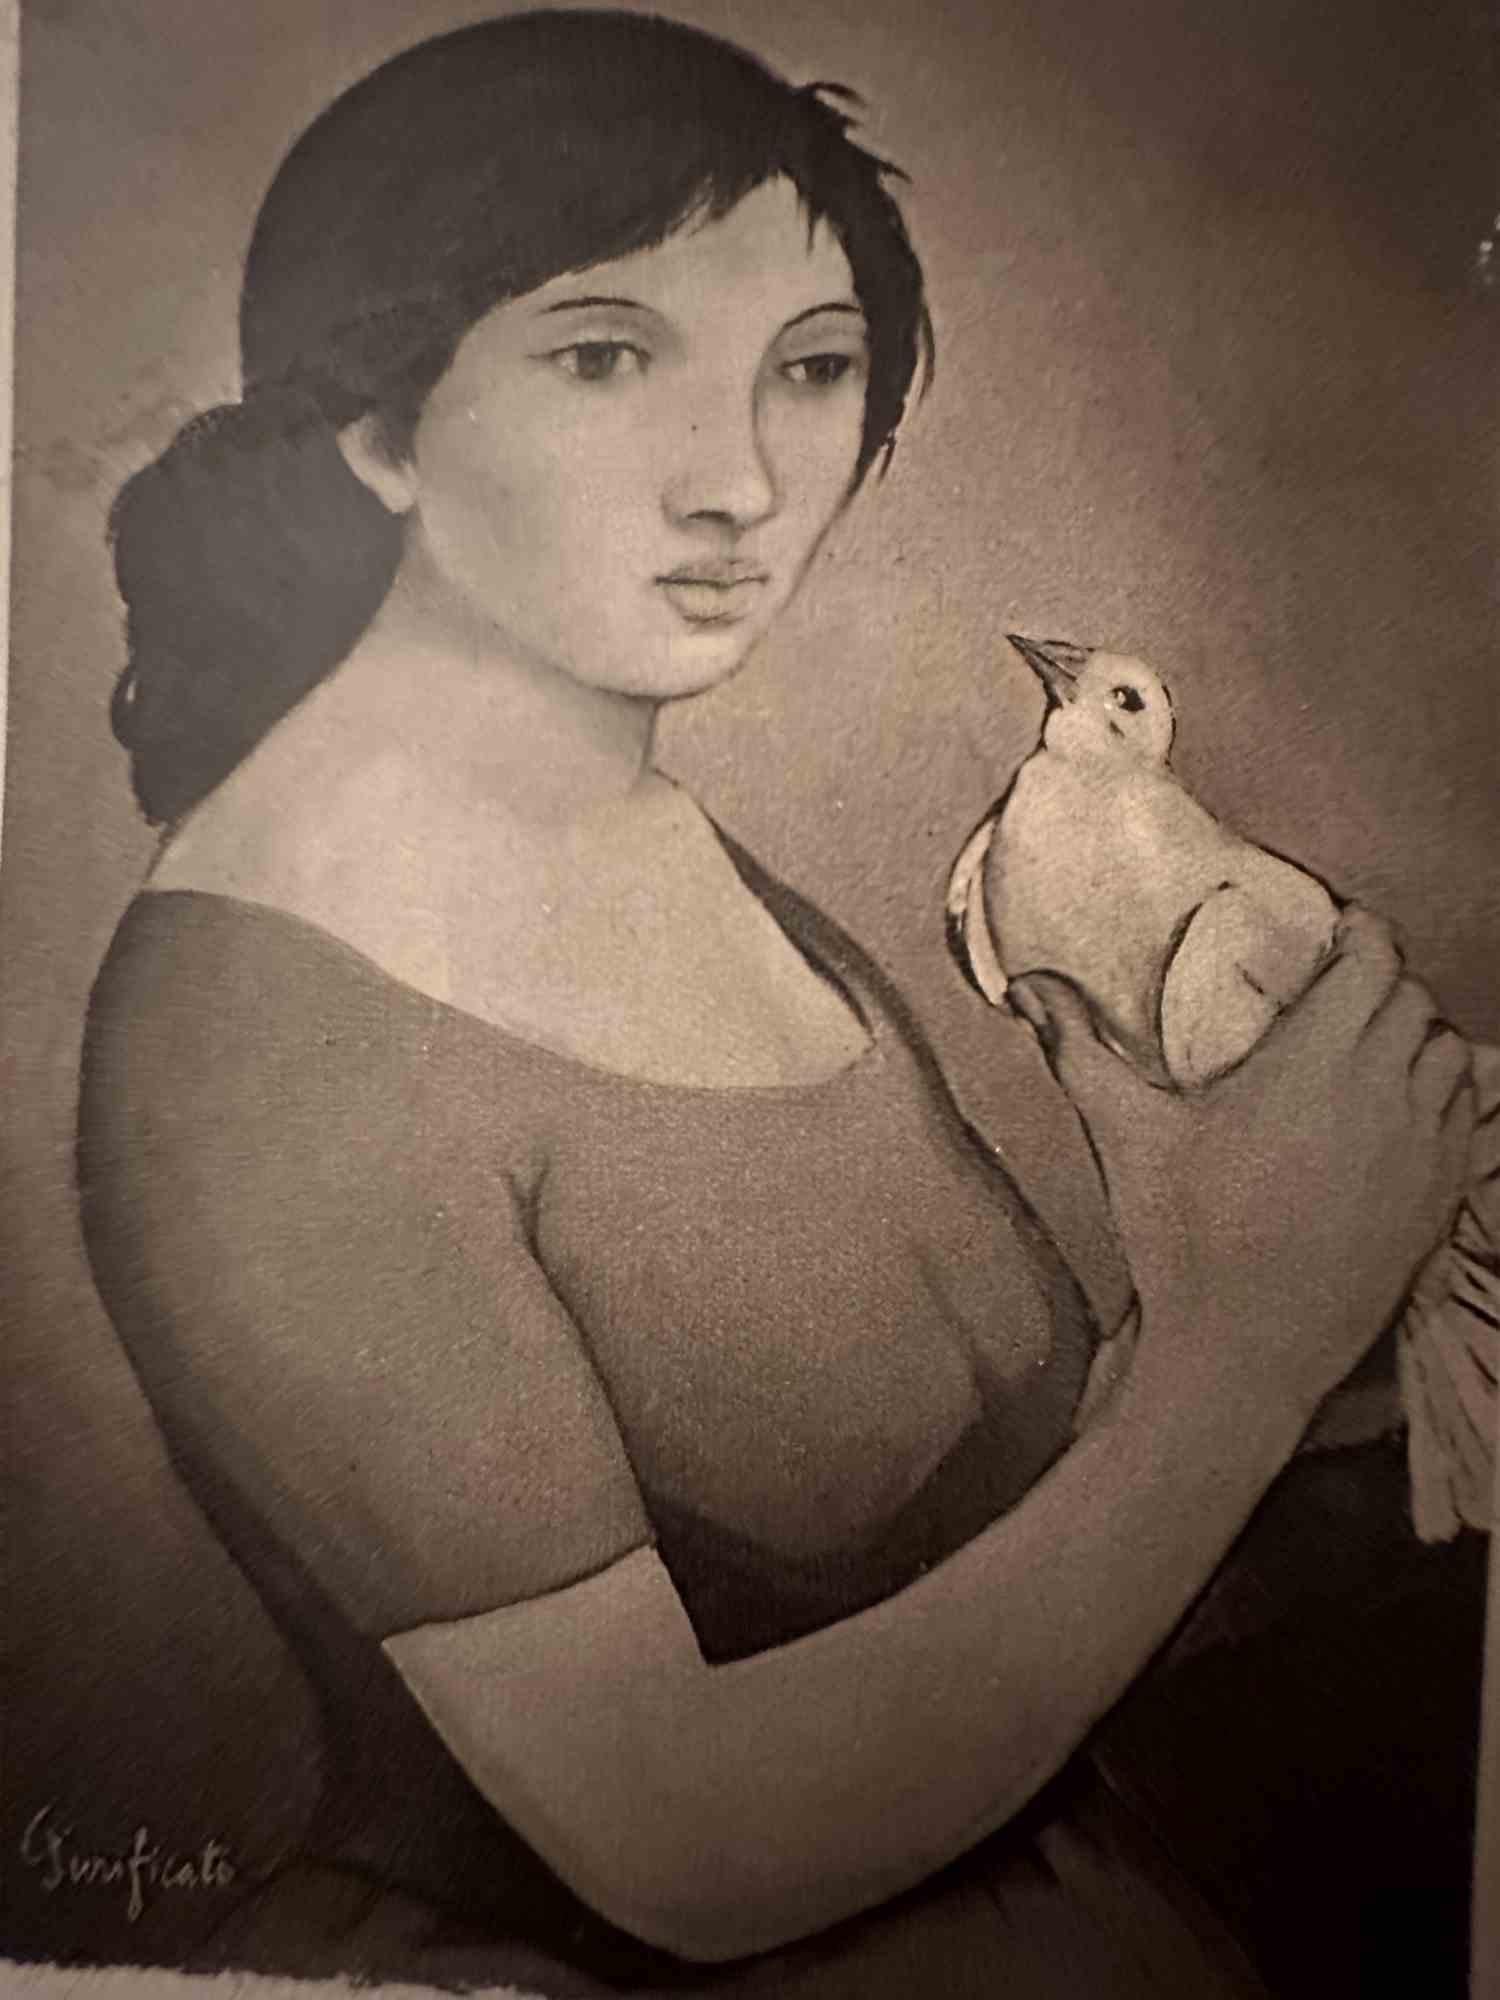 Unknown Portrait Photograph - Girl With Bird- Photo of Painting by Domenico Purificato - 1950s